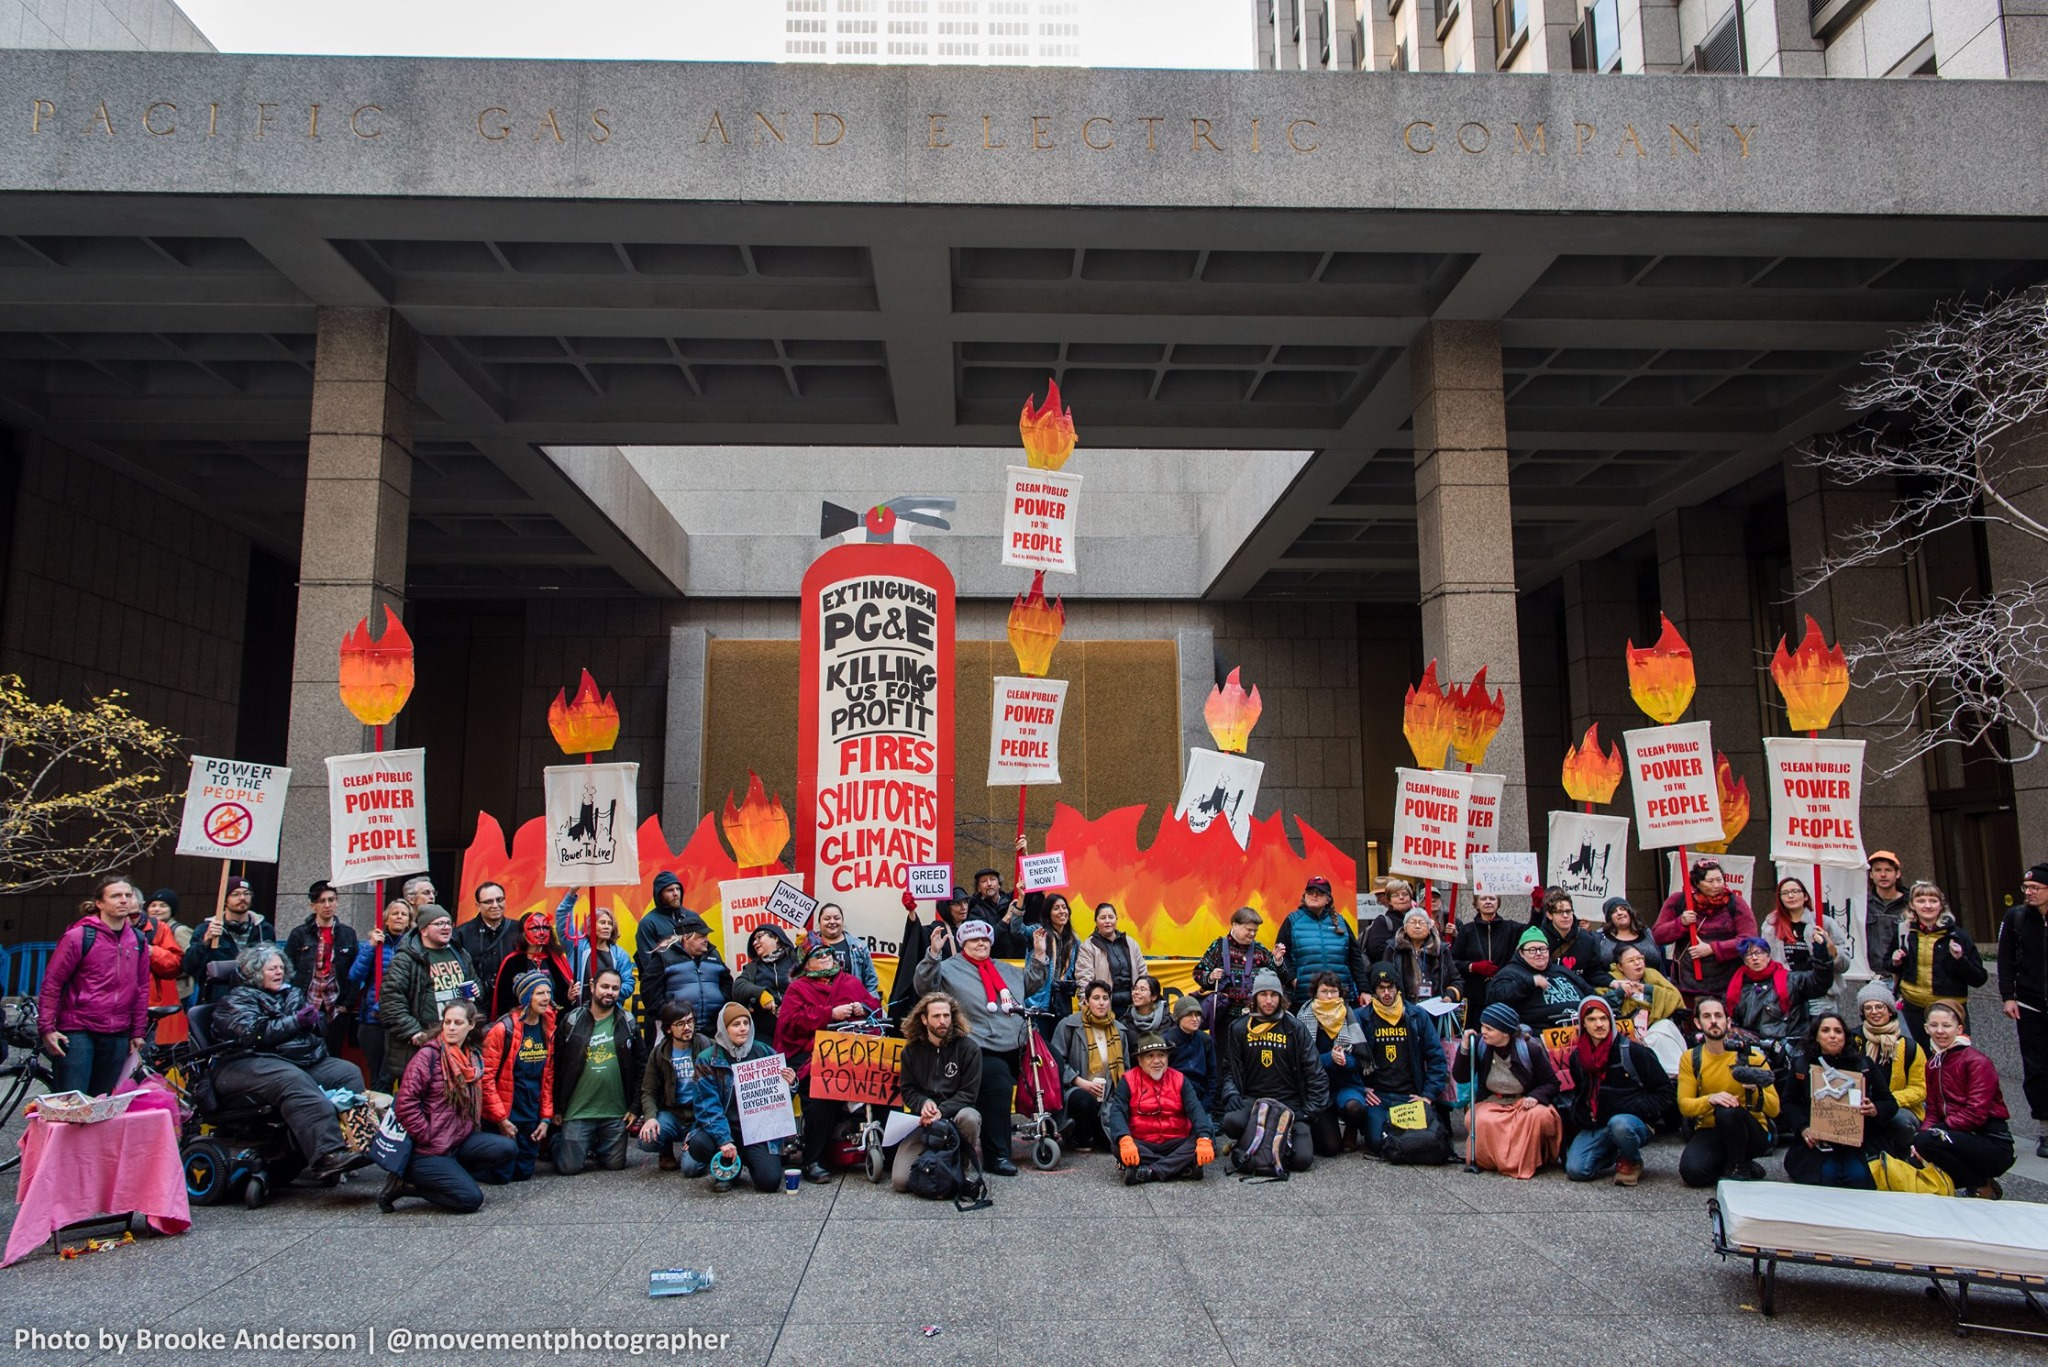 A large group of about 80 climate justice protestors in front of PG&E headquarters. The protestors hold banners and placards reading Power to the People. A large cardboard fire stands behind them, and an extinguisher reads Extinguish PG&E Killing us for Profit. Many of the protestors present are in wheelchairs or use mobility aids.